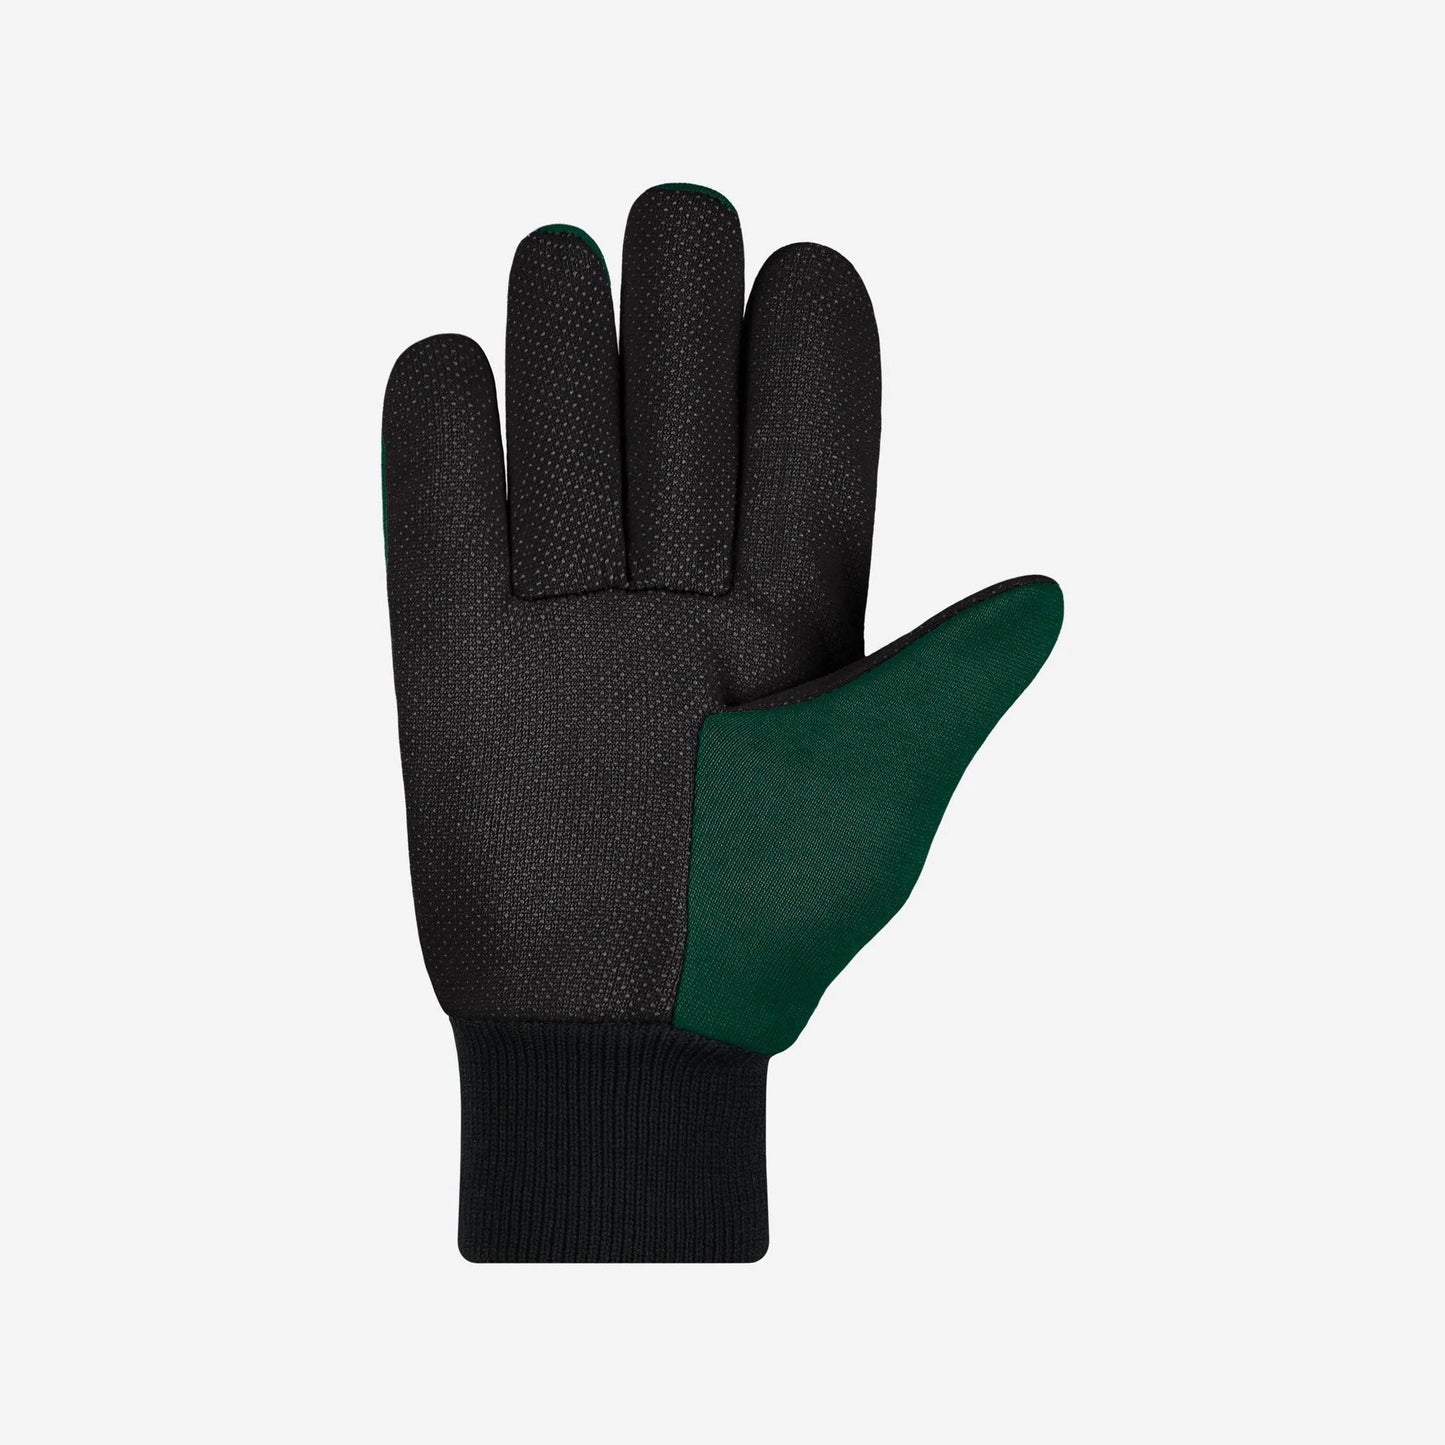 Green Bay Packers Utility Gloves